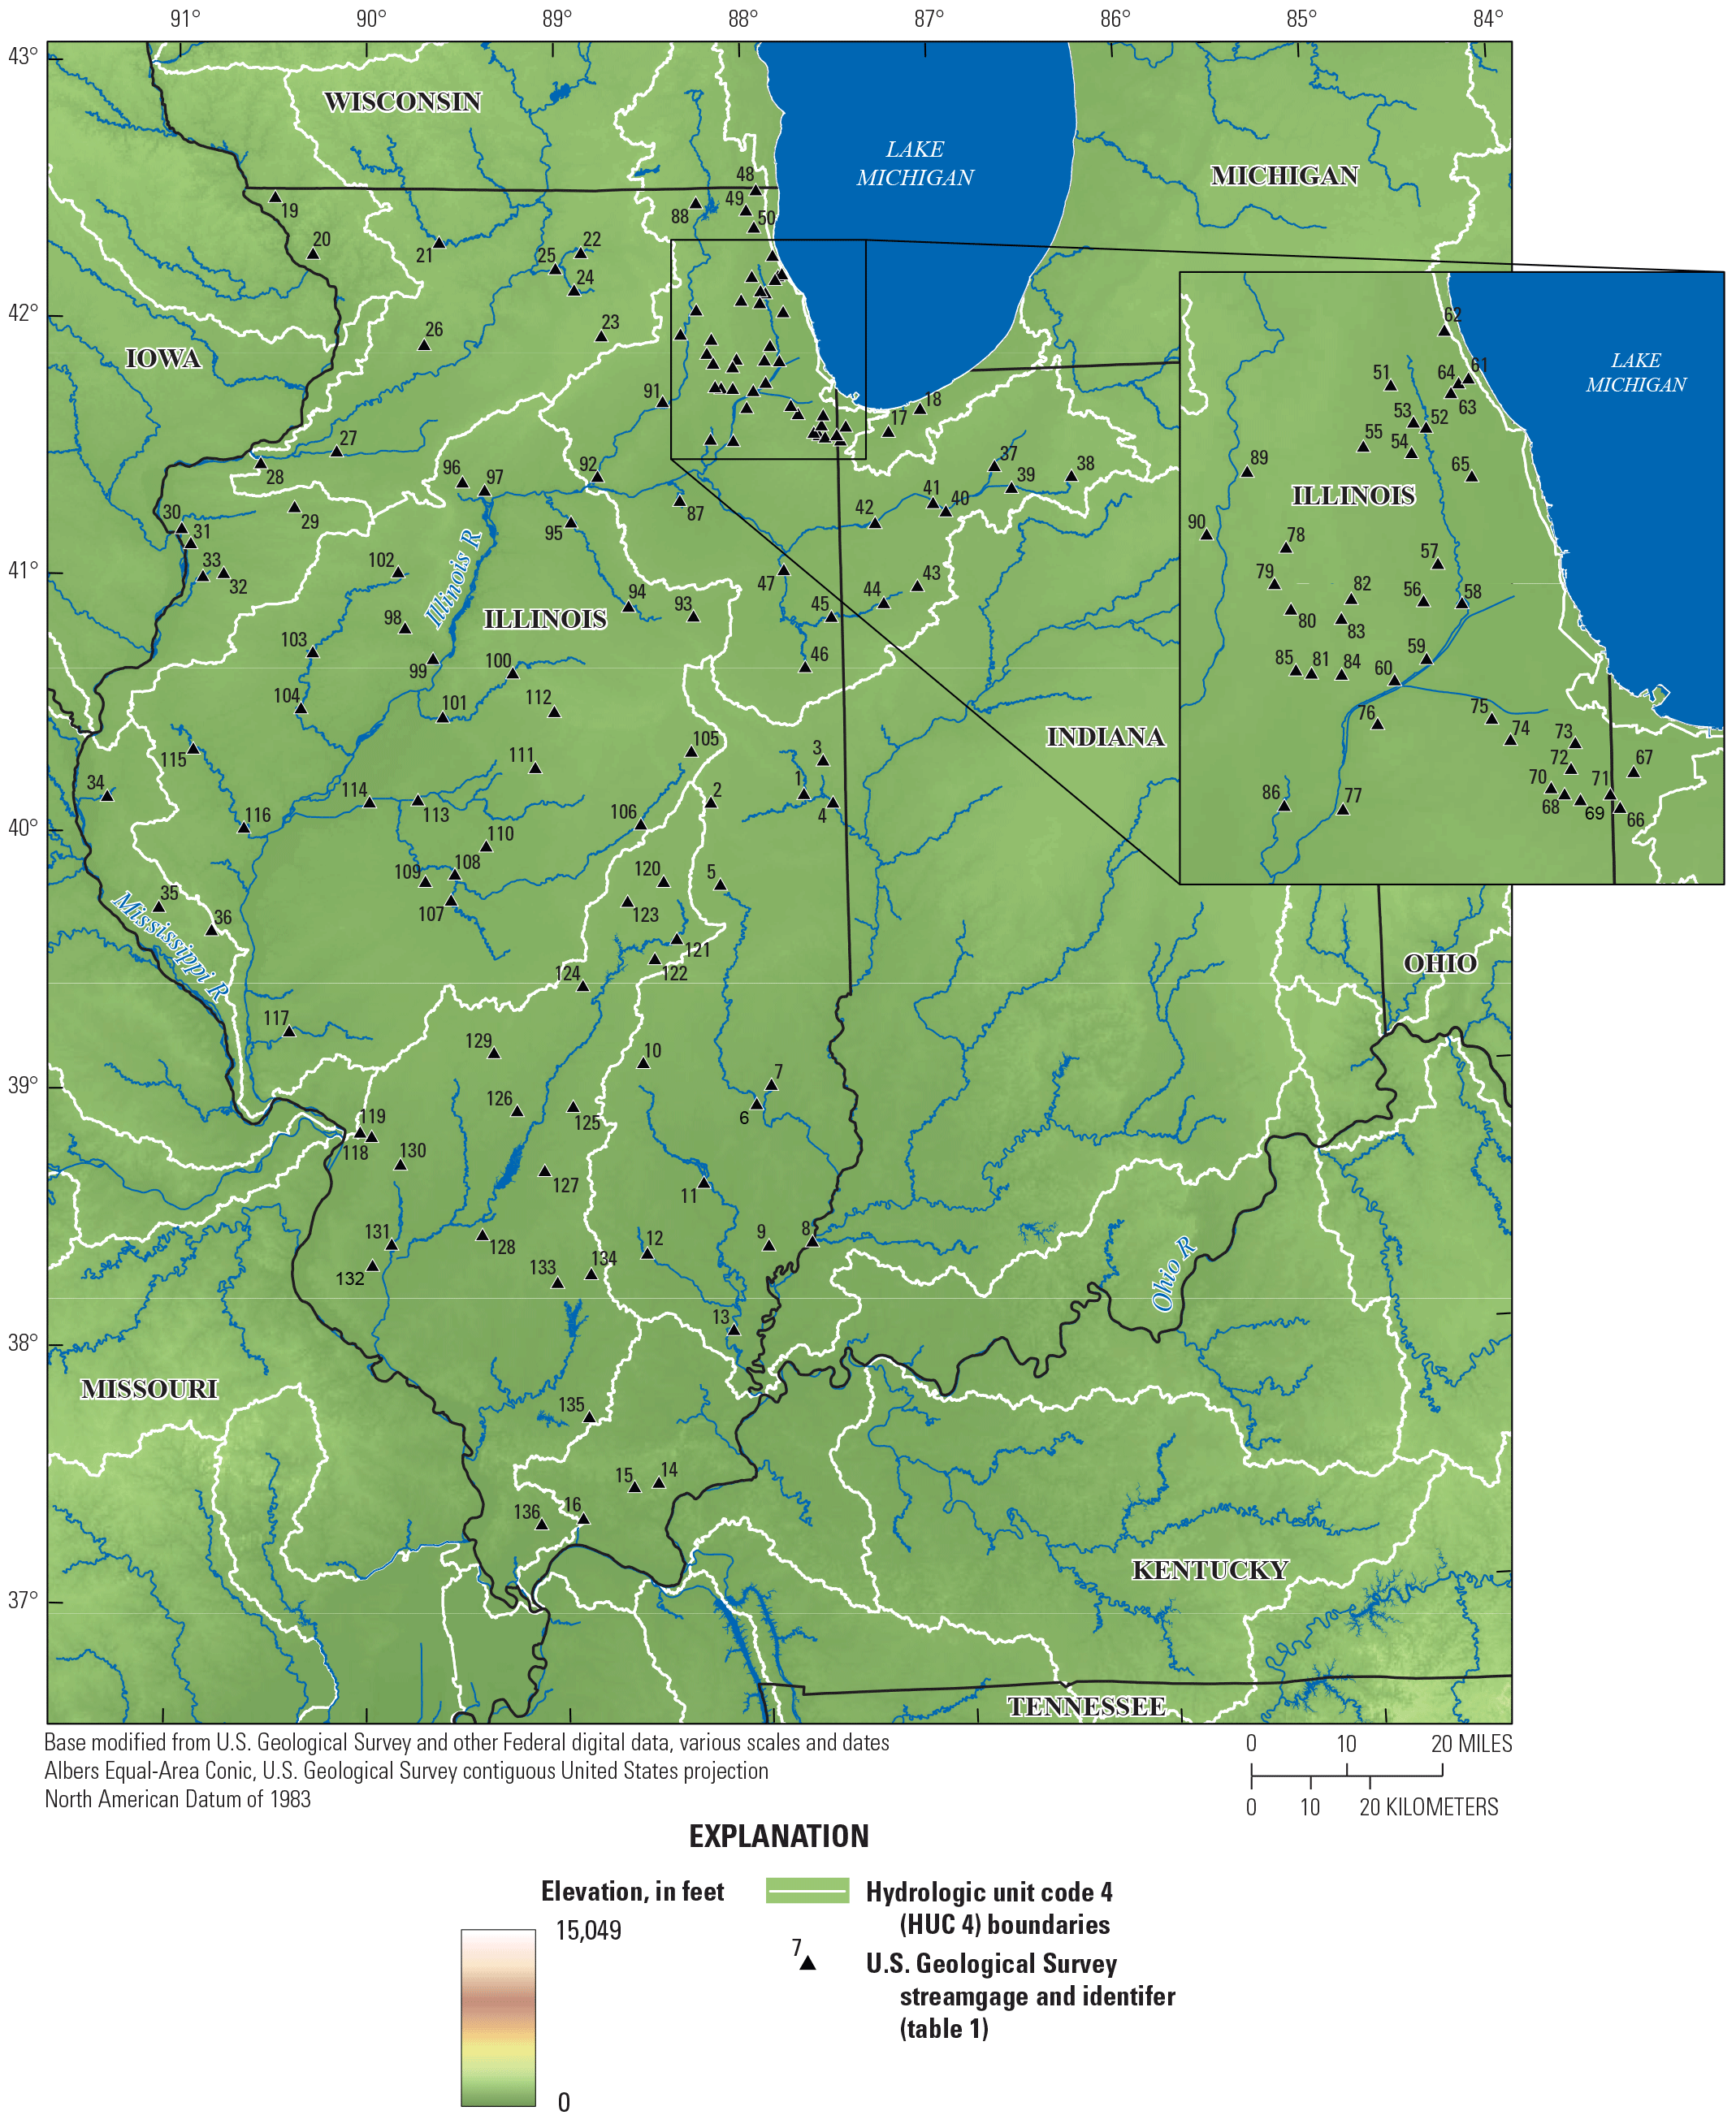 Elevation, major rivers, and U.S. Geological Survey streamgages in Illinois.